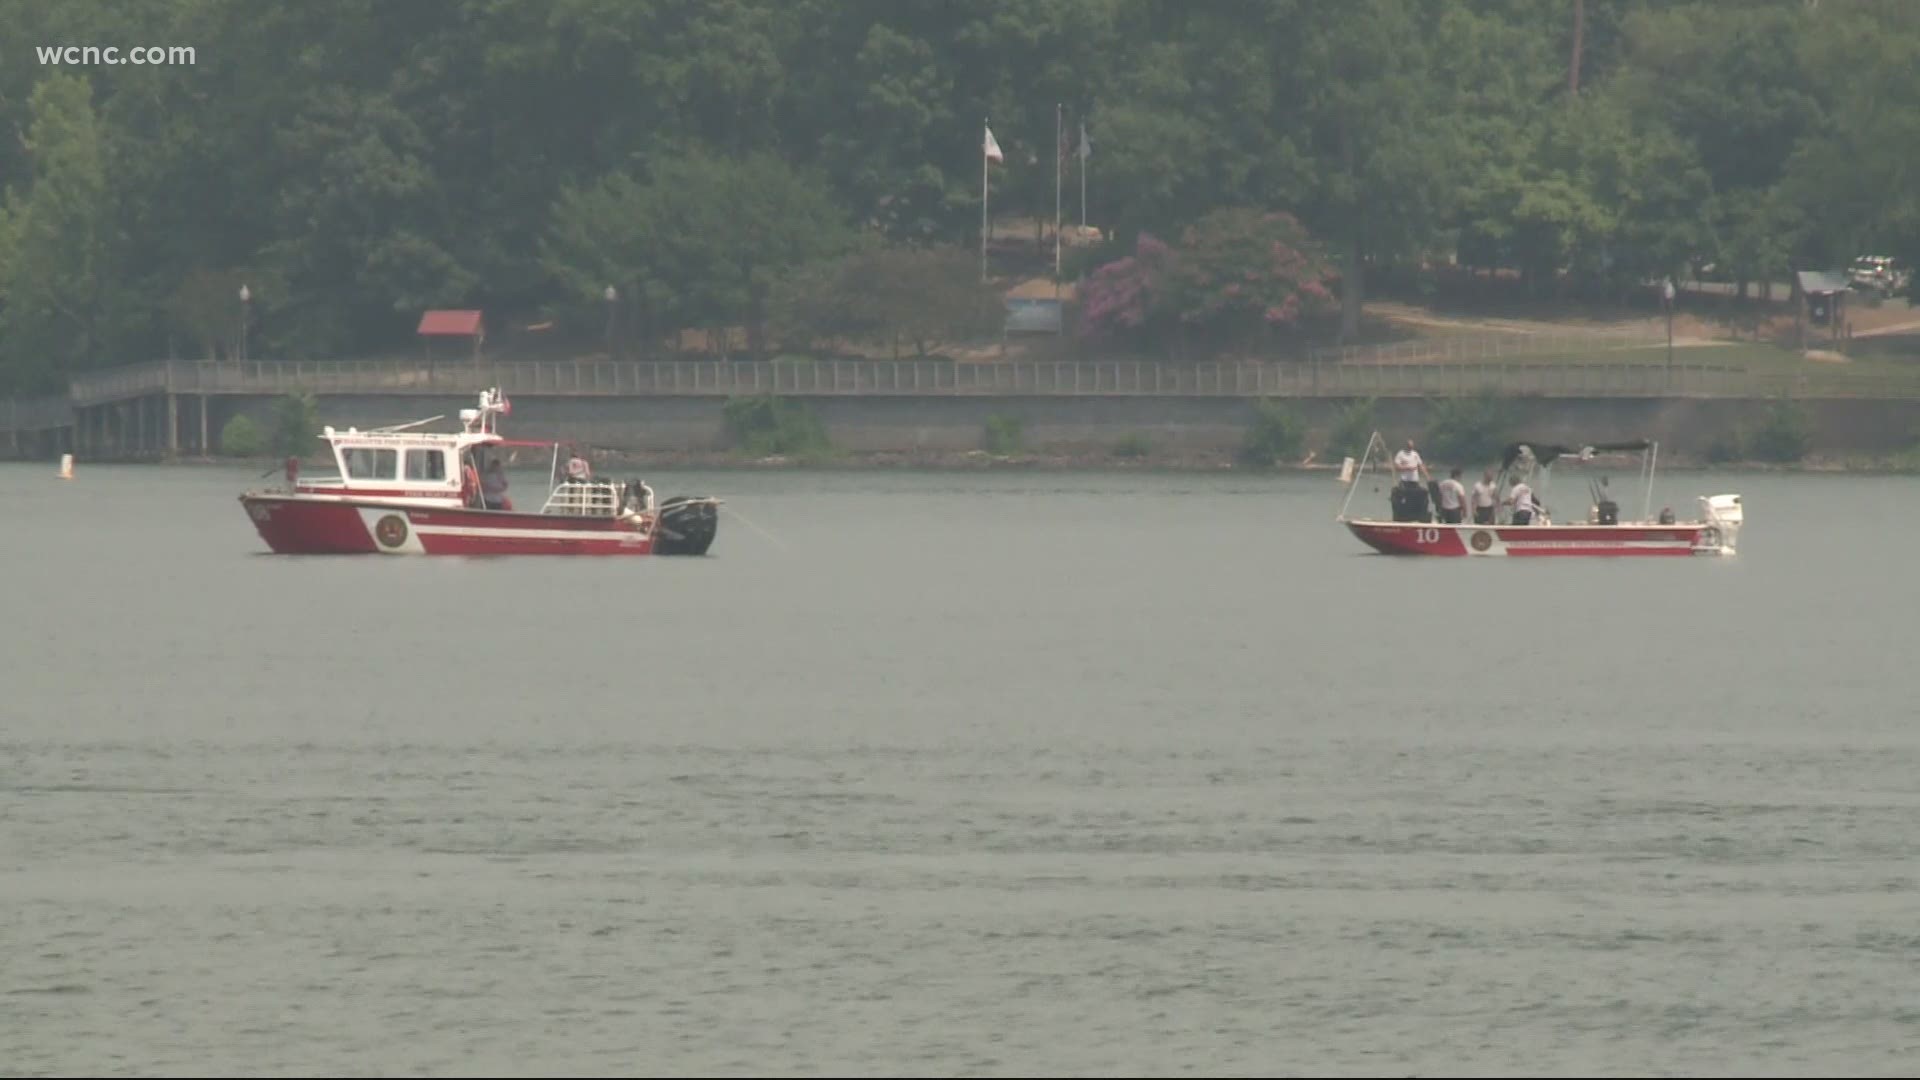 Lexi Wilson has the latest on the search from the North Carolina side of the lake.